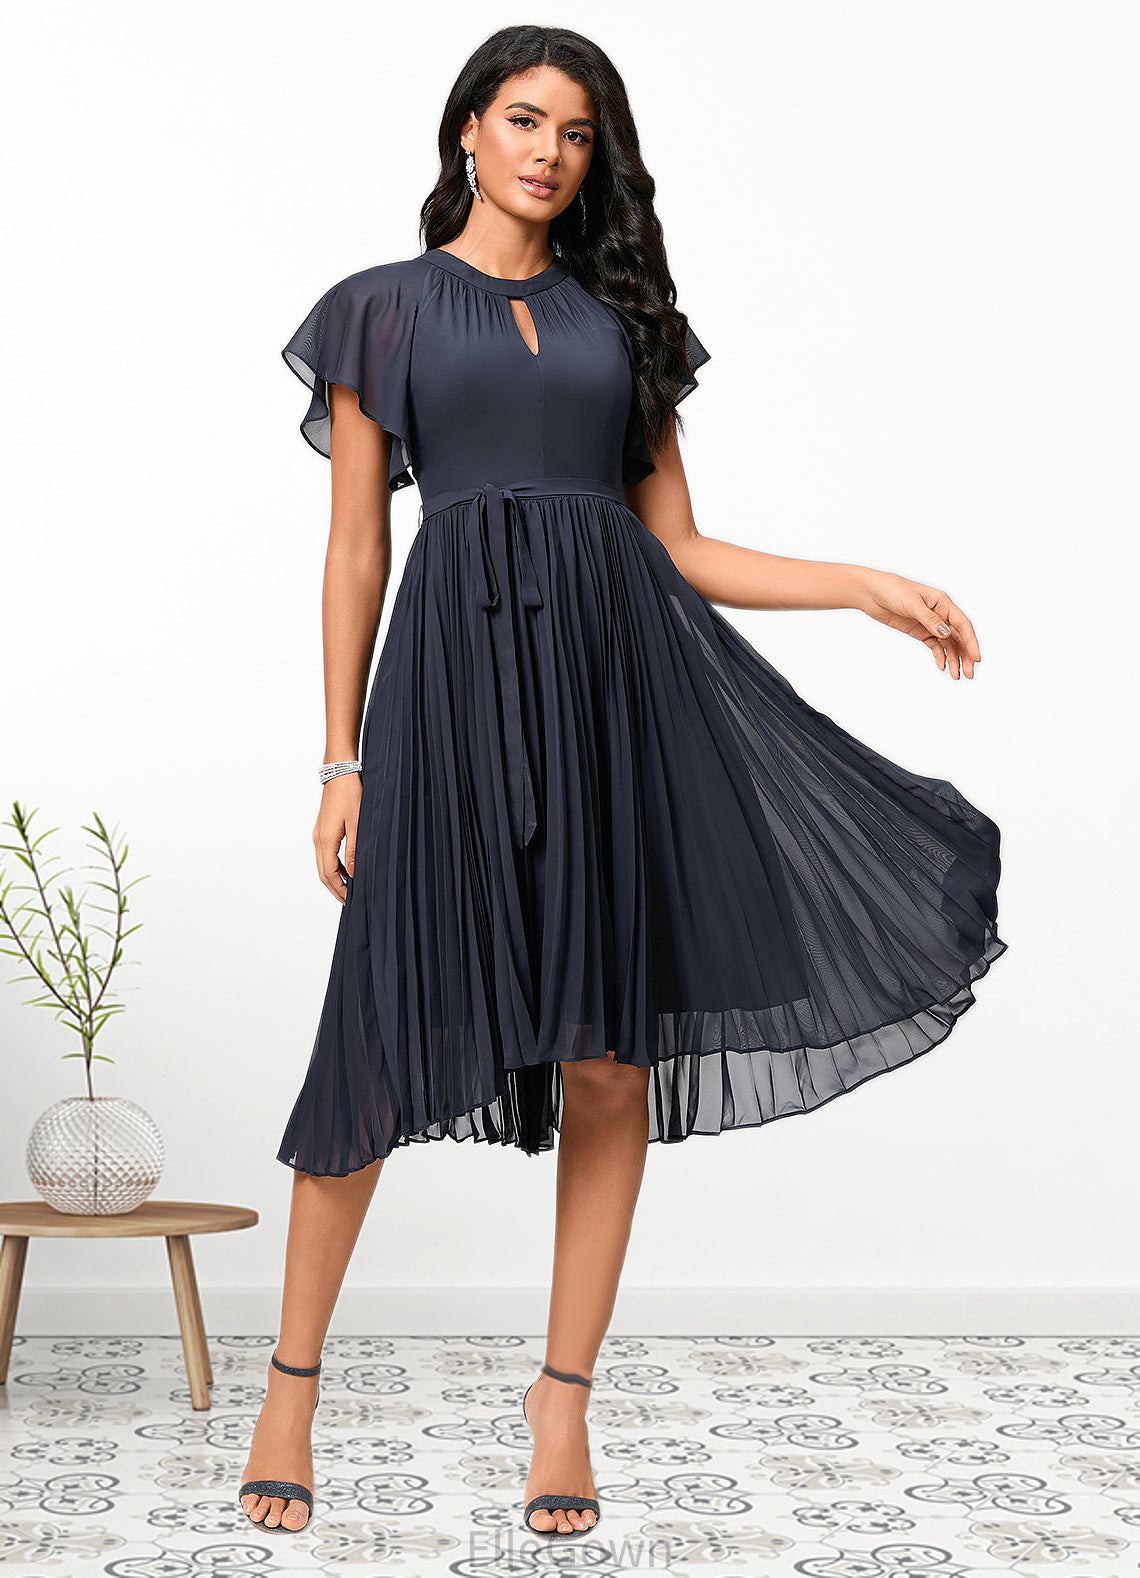 Undine A-line Scoop Asymmetrical Chiffon Cocktail Dress With Bow Pleated DEP0022530